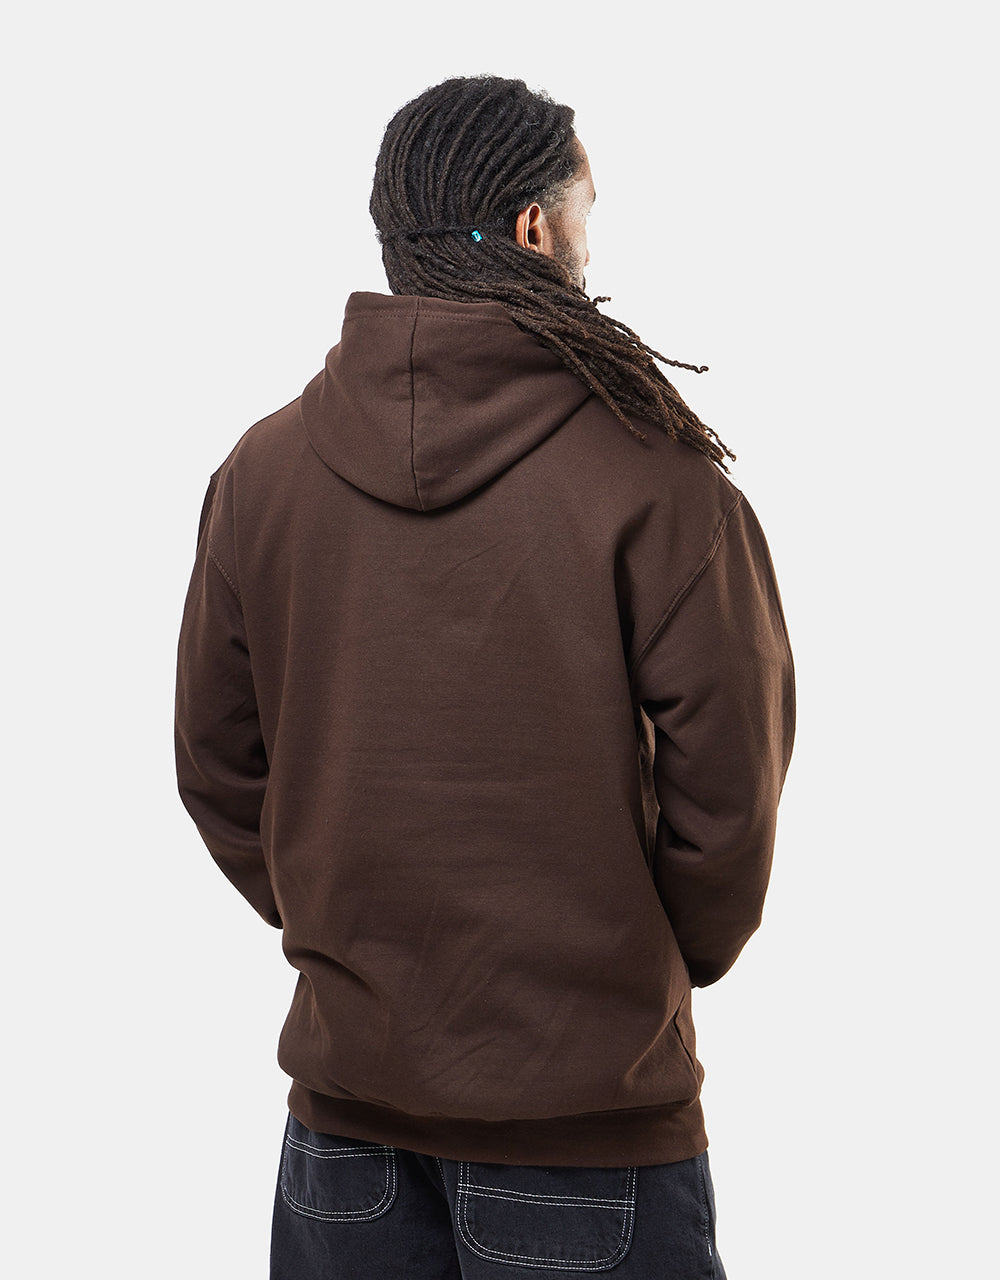 Route One The Natural World Pullover Hoodie - Hot Chocolate